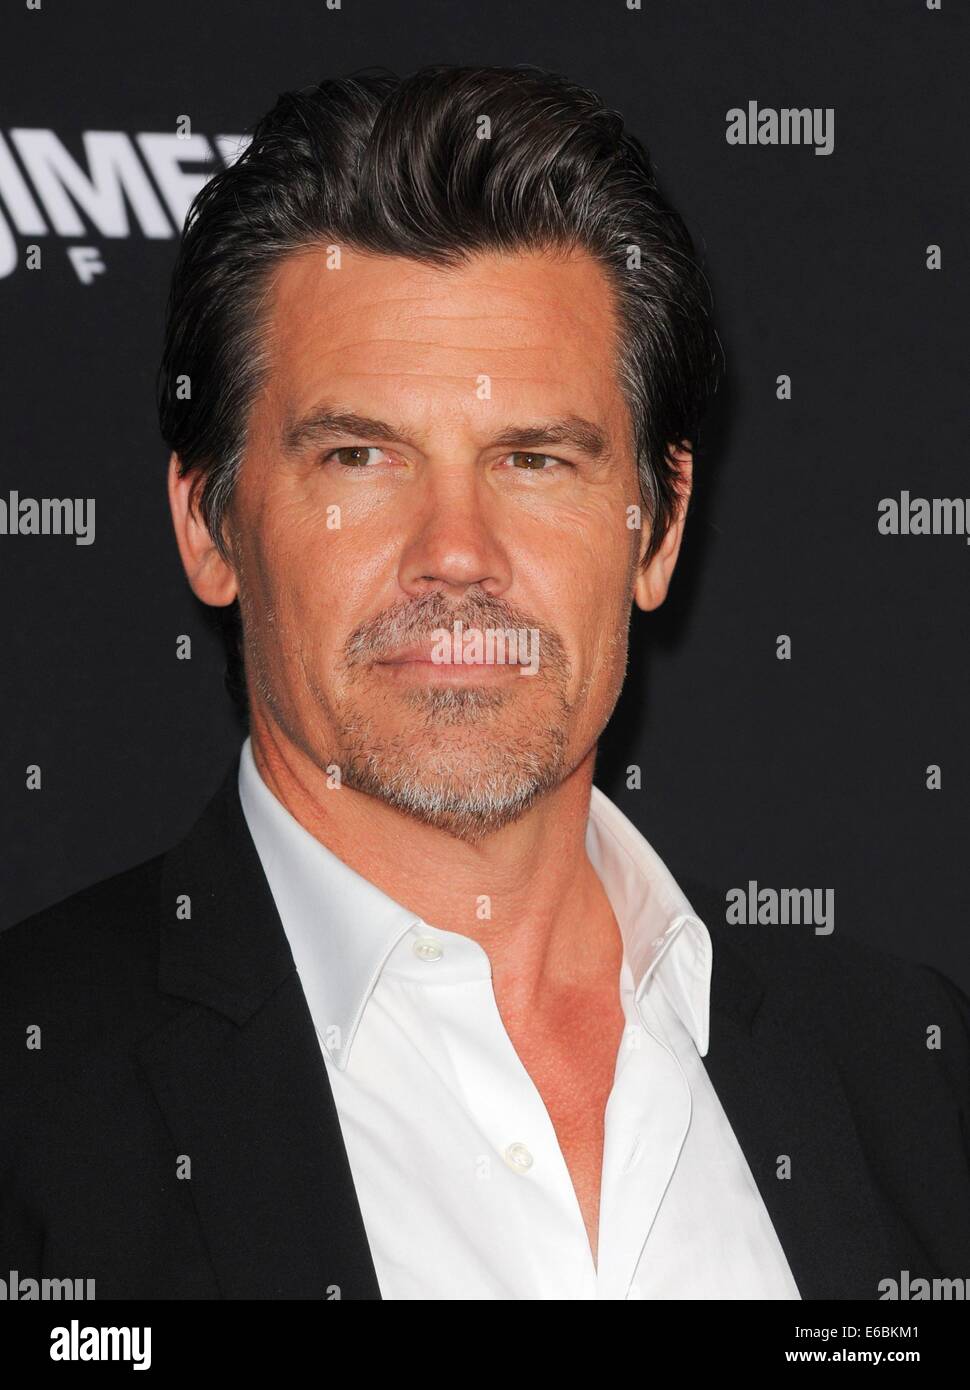 Los Angeles, CA, USA. 19th Aug, 2014. Josh Brolin at arrivals for SIN CITY: A DAME TO KILL FOR Premiere, TCL Chinese 6 Theatres (formerly Grauman's), Los Angeles, CA August 19, 2014. Credit:  Elizabeth Goodenough/Everett Collection/Alamy Live News Stock Photo